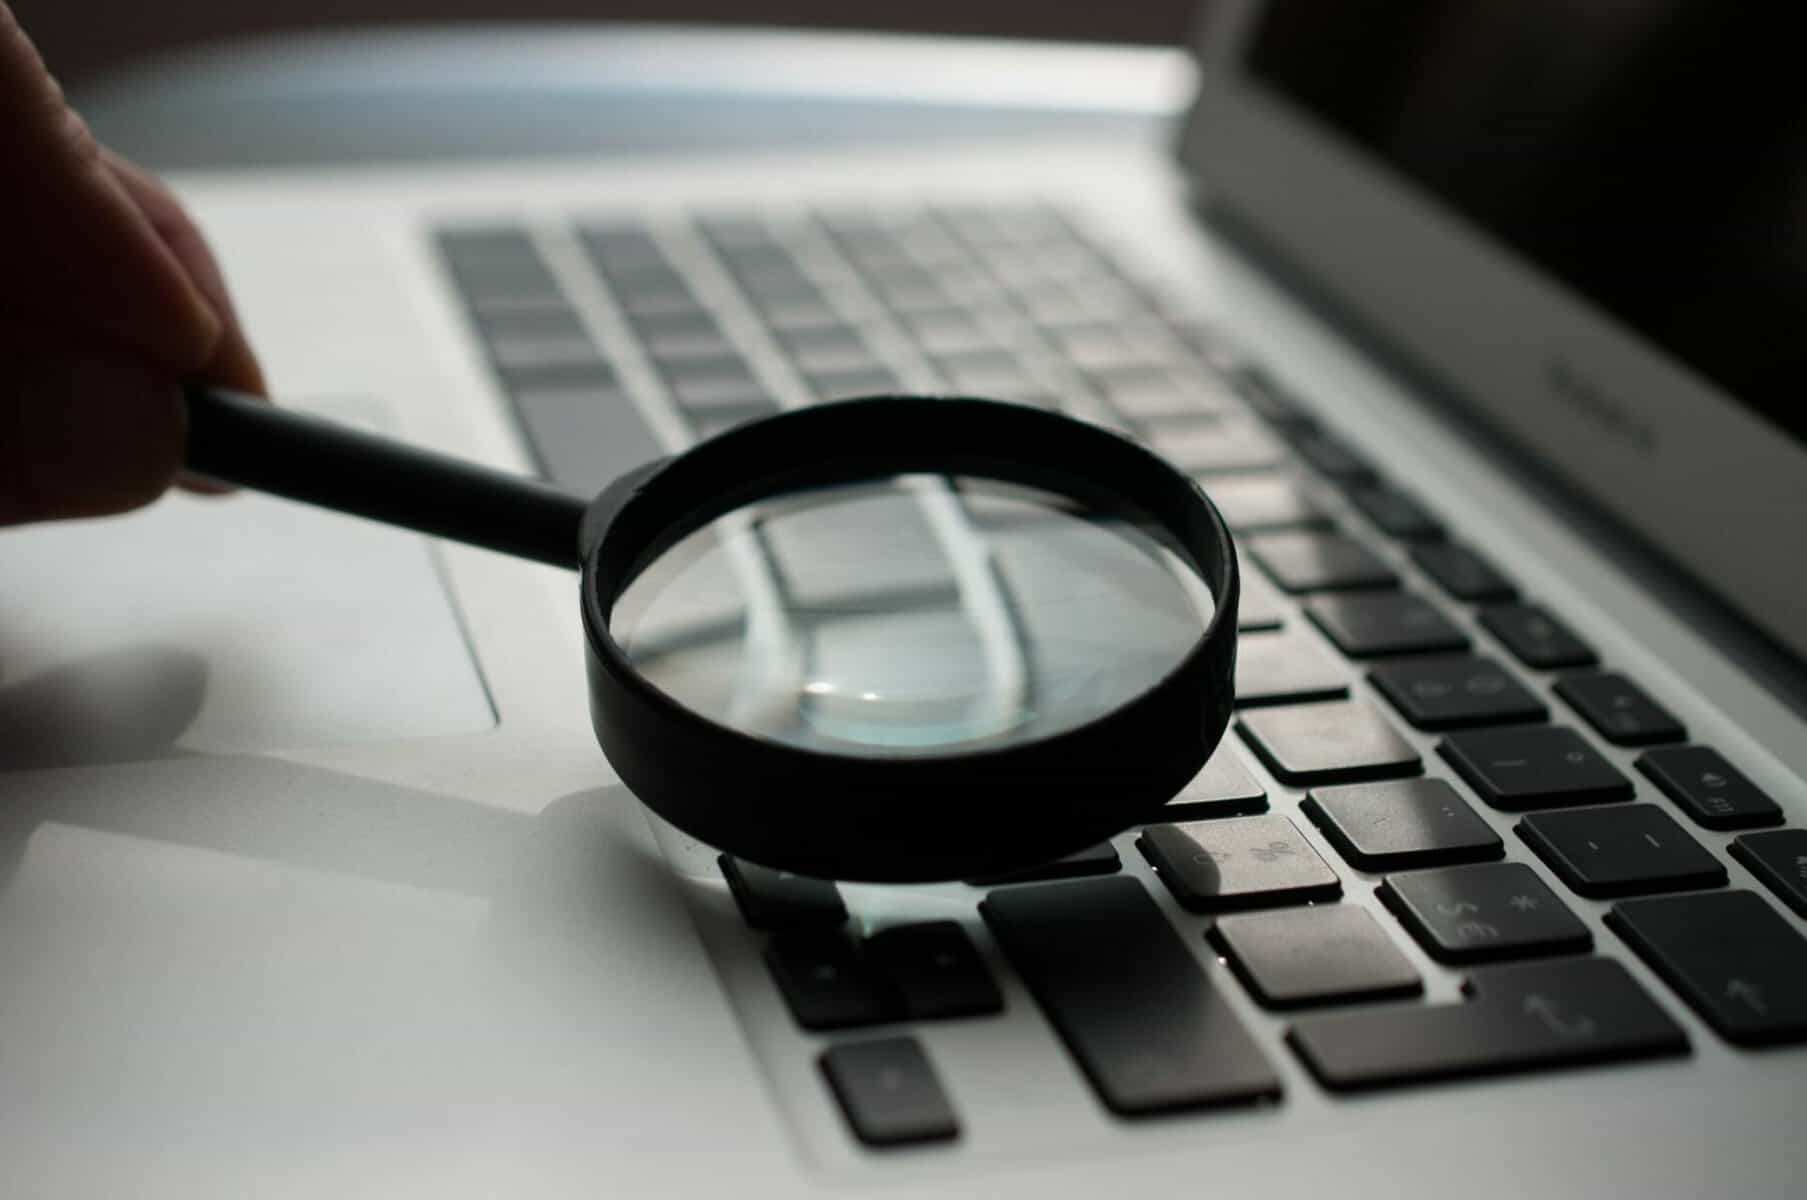 Magnifying glass over laptop keyboard